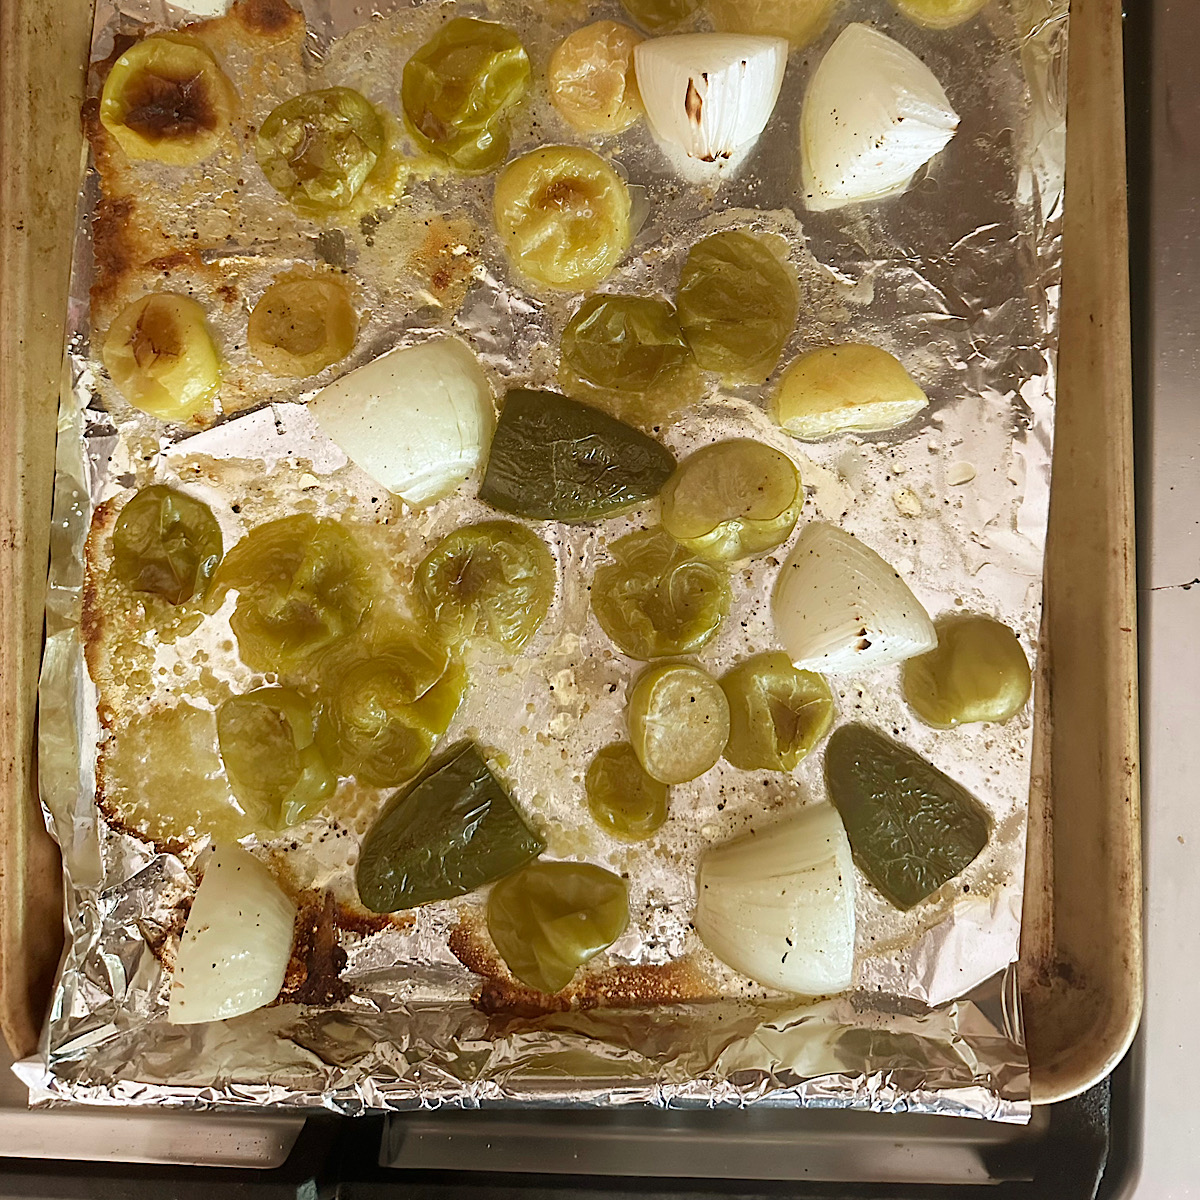 Roasted tomatillos and jalapenos on foil lined baking sheet